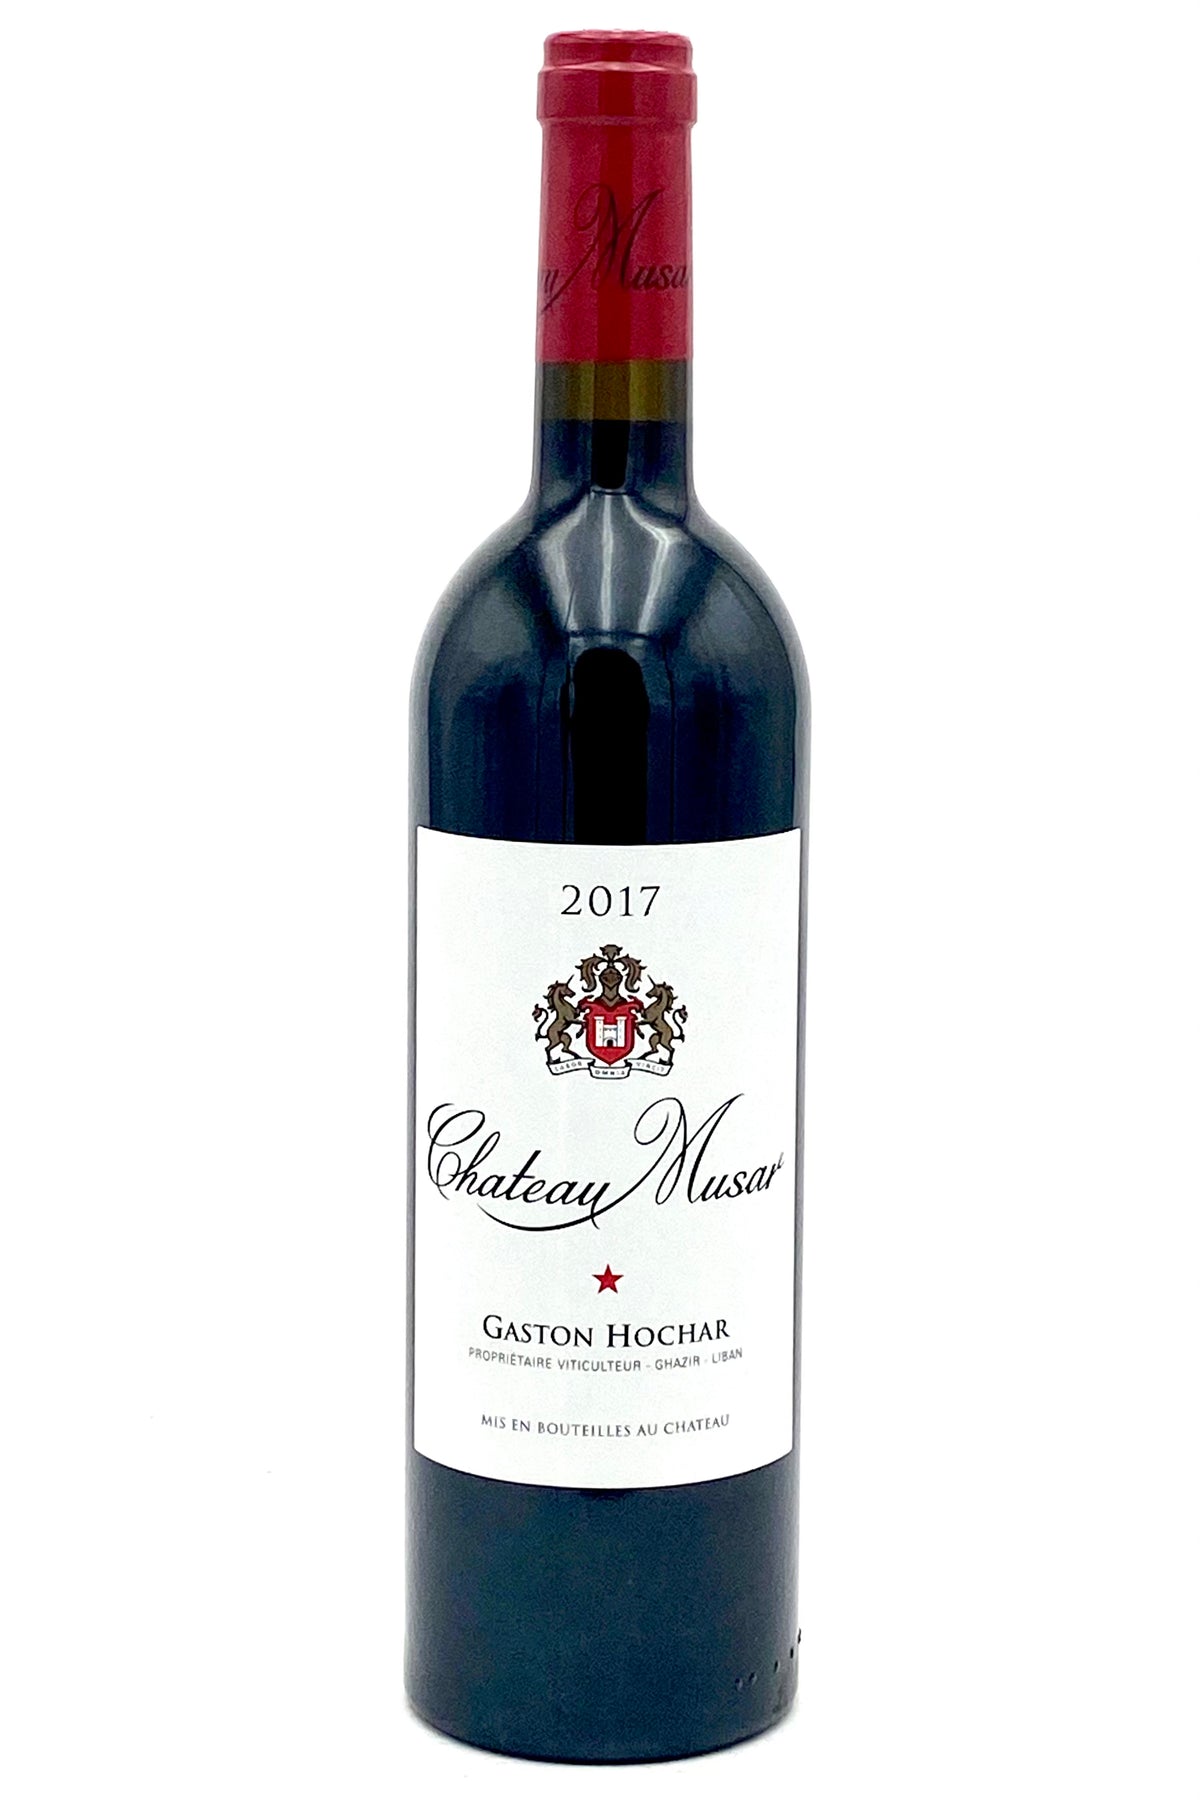 Chateau Musar 2017 Red Wine Lebanon Bekaa Valley